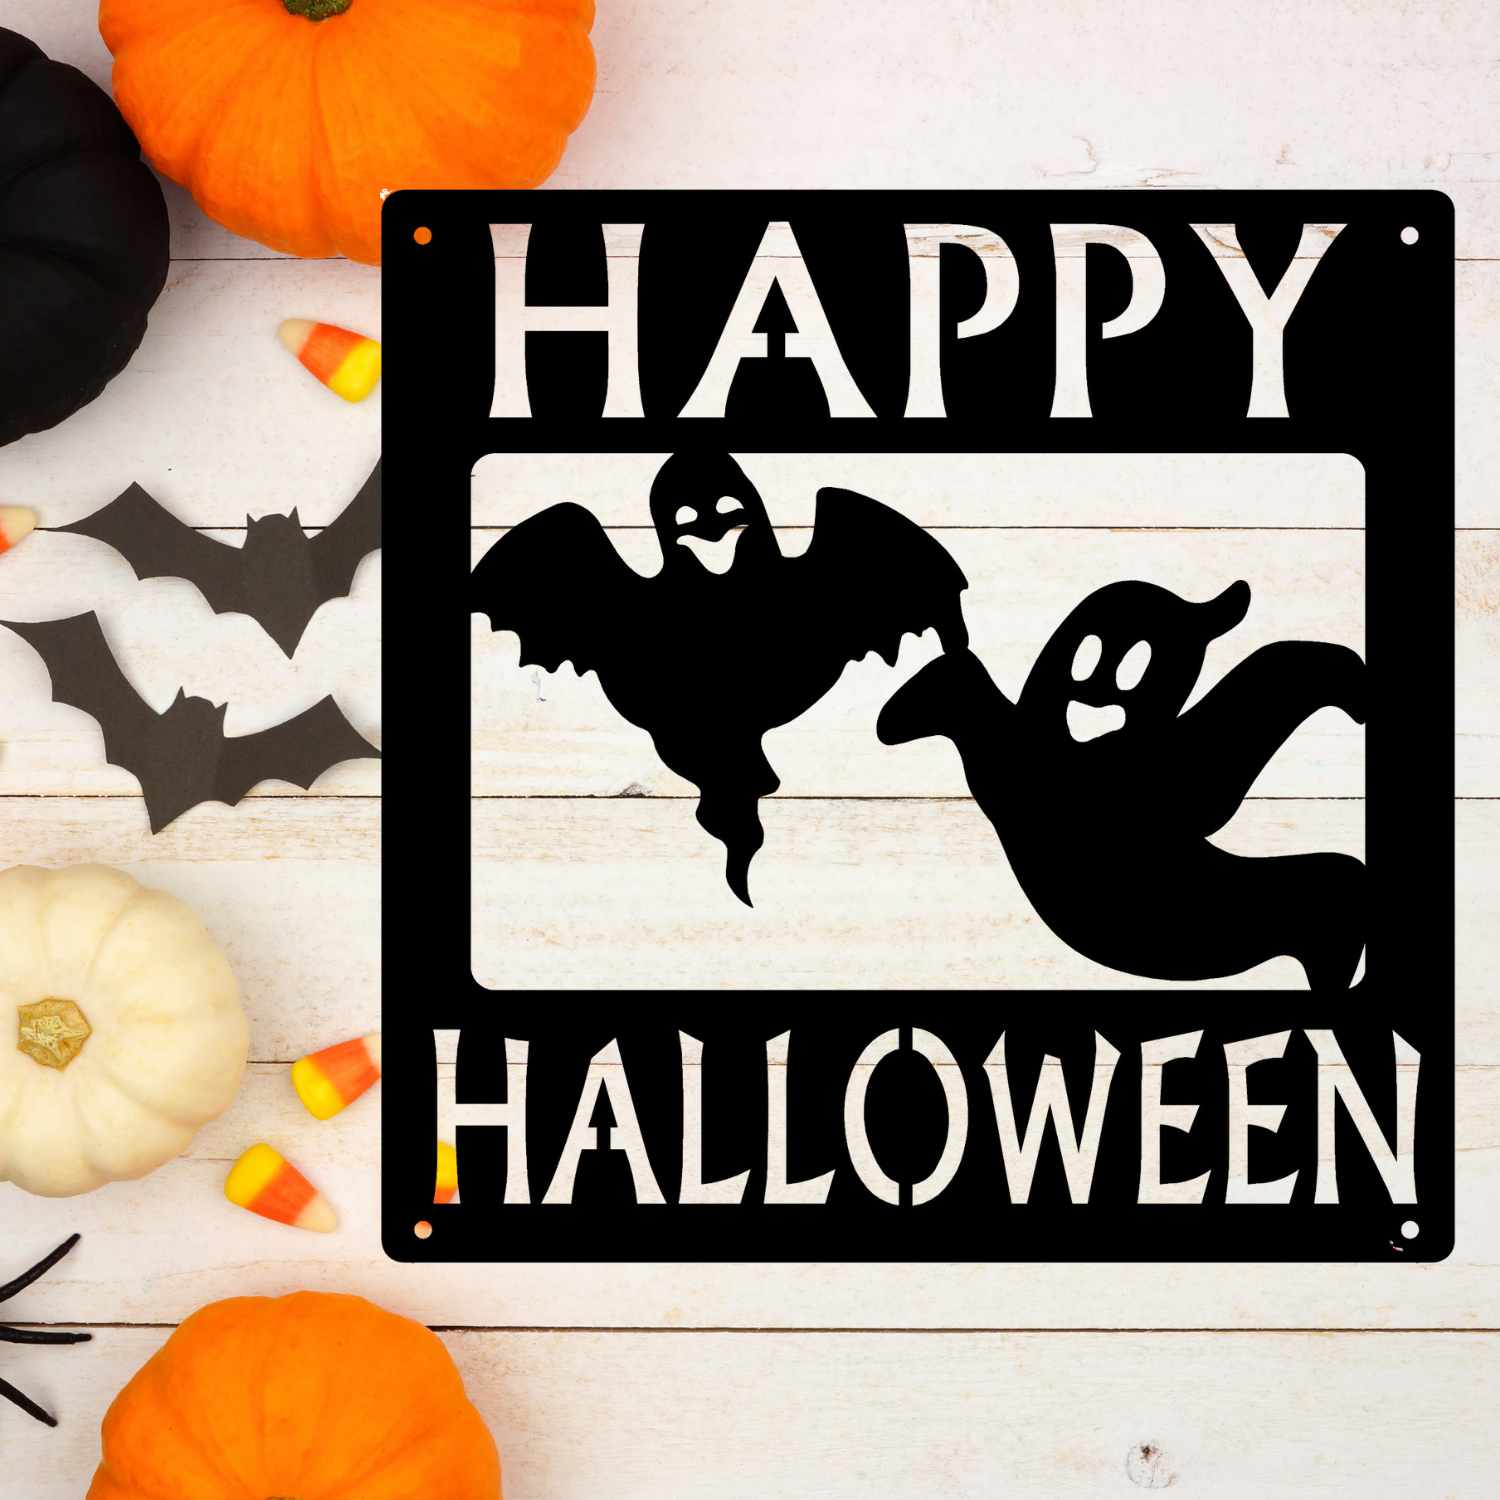 Happy Halloween sign with metal ghosts